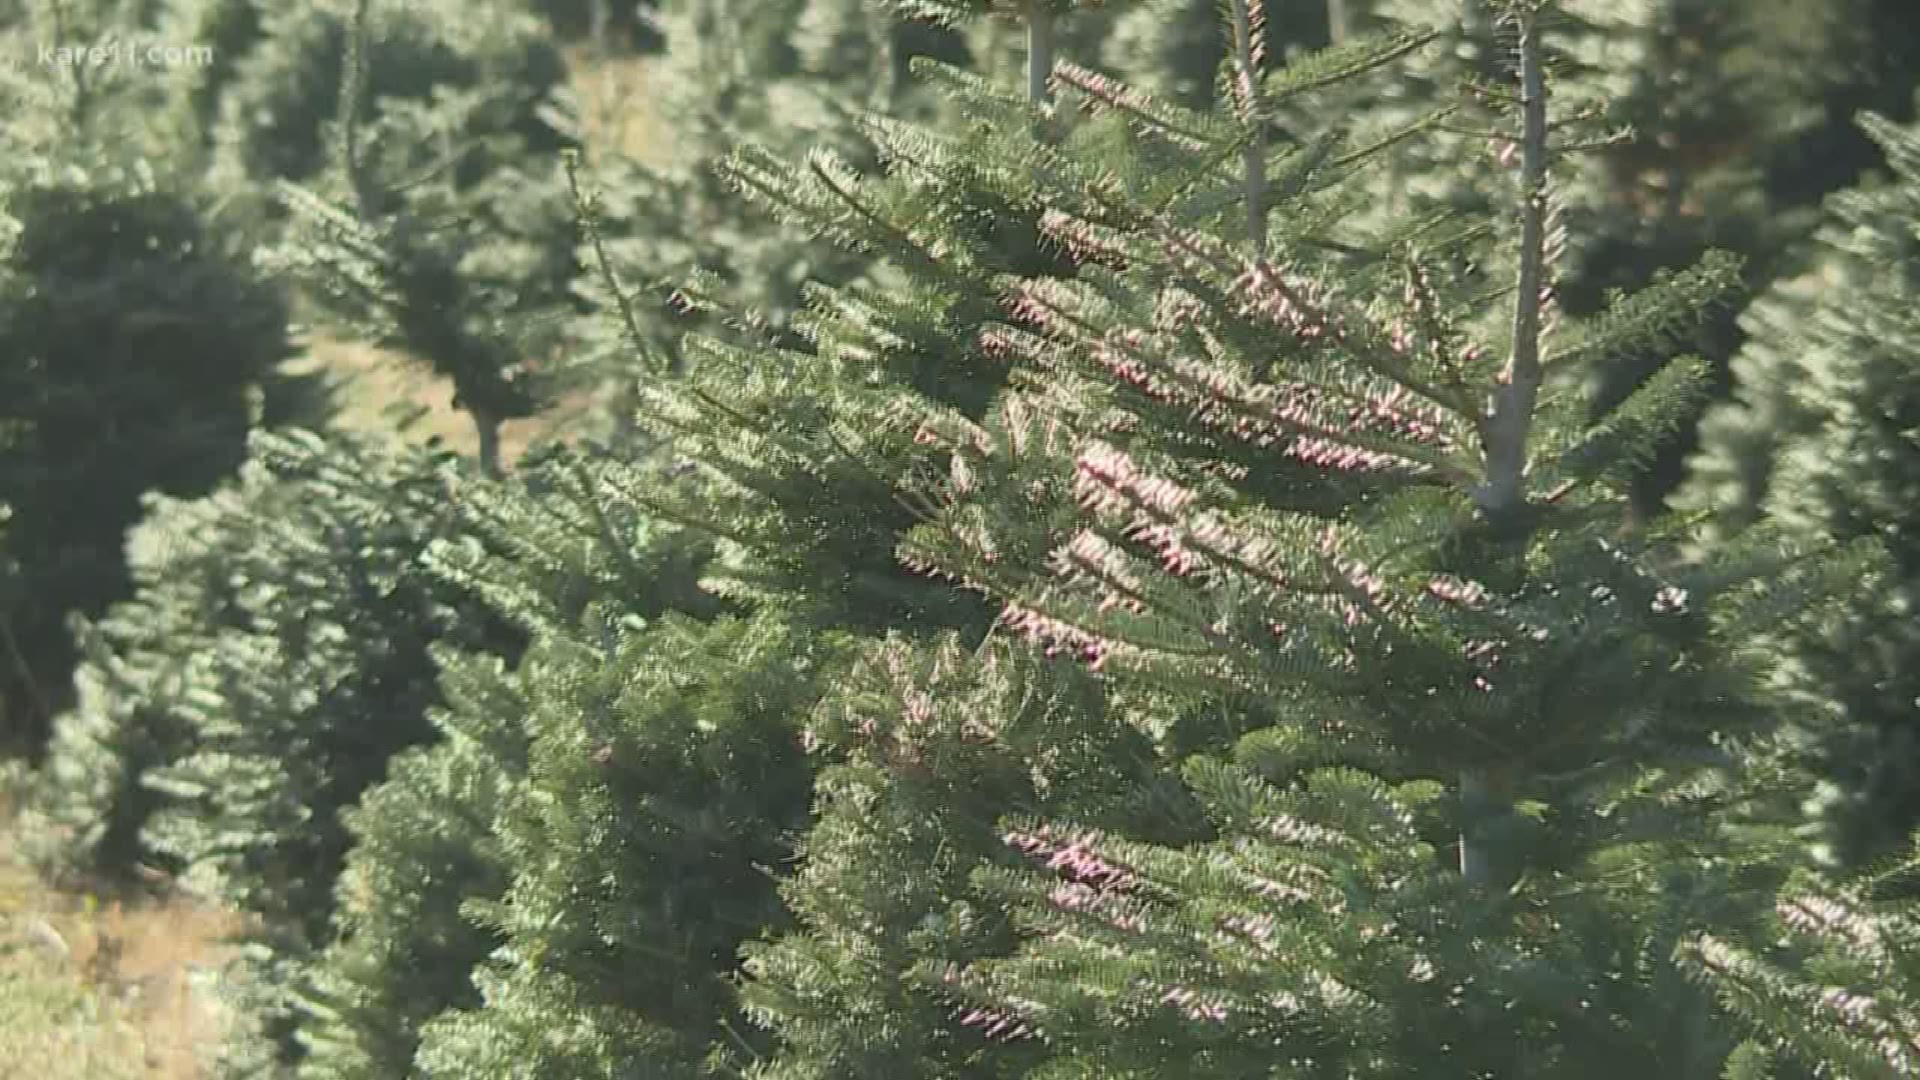 Real trees are up 5-15% from last year, according to the Real Christmas Tree Board, with the average tree now costing about $85 to $93.